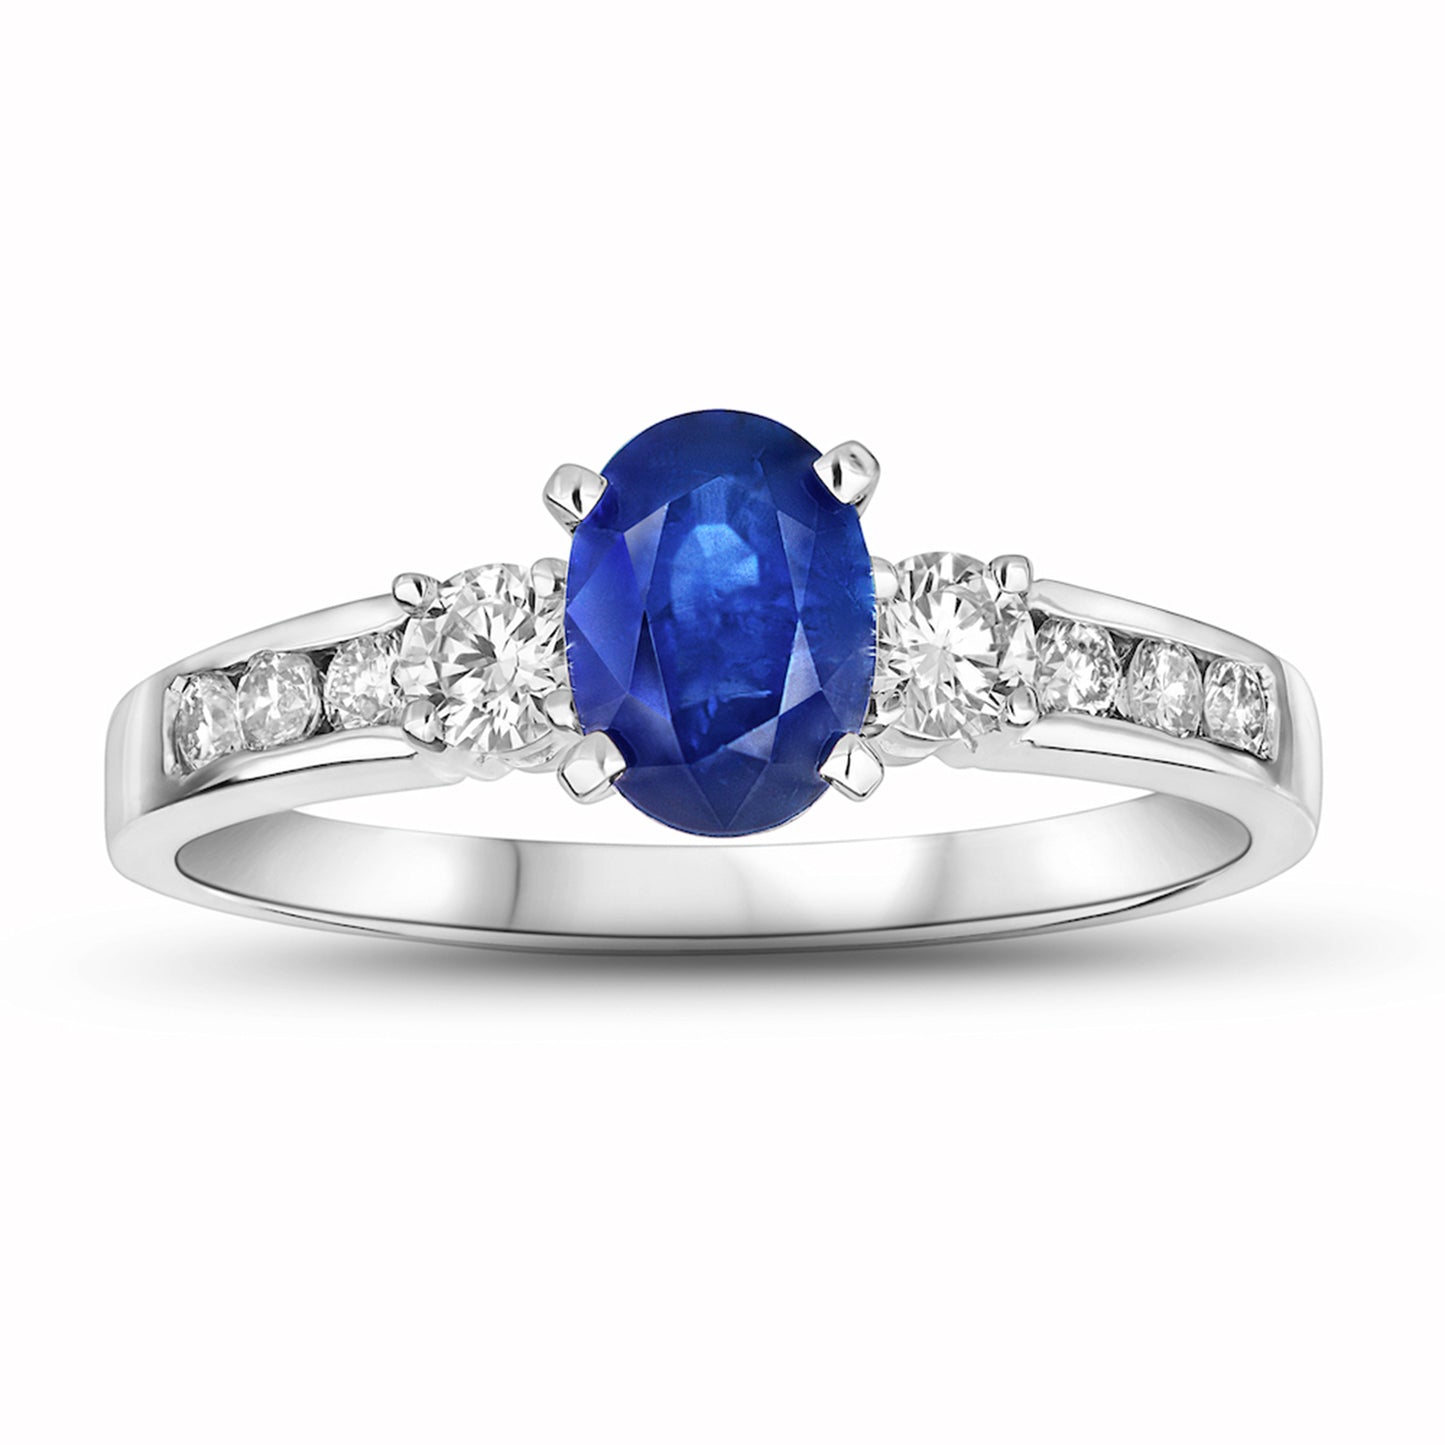 1 2/5ct Blue Sapphire & Diamond Engagement Ring in 14k White Gold